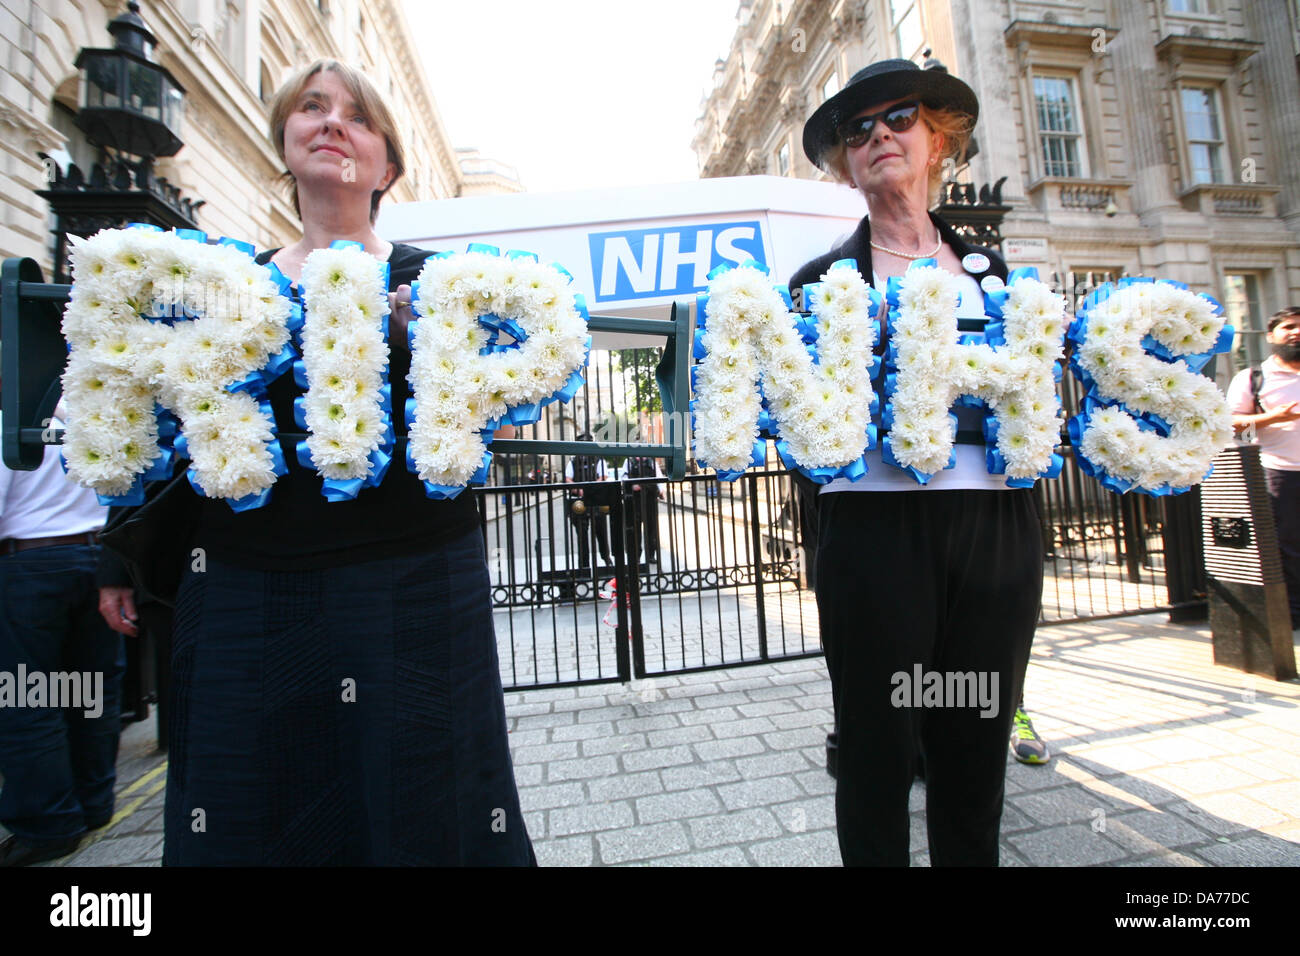 London, UK. 5th July, 2013. Medical staff march to Downing Street to protest privatisation NHS on the 65th anniversary of it's founding. Jacky Davis is holding the NHS wreath  Credit:  Mario Mitsis / Alamy Live News Stock Photo